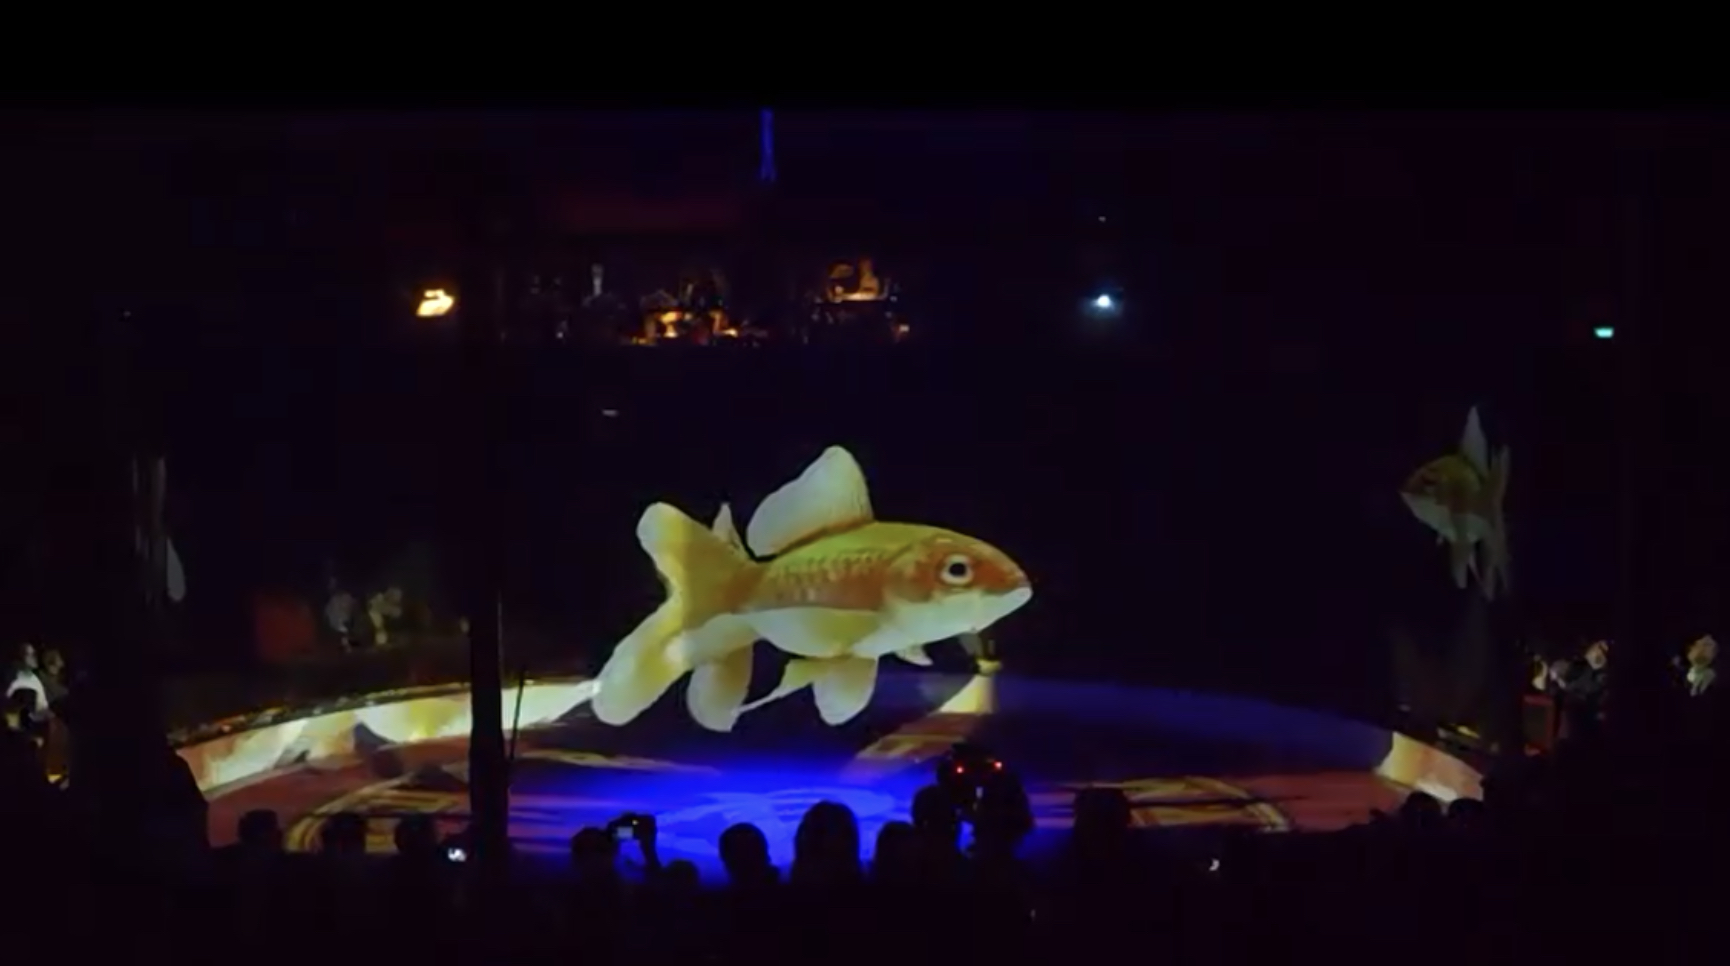 At one point a gigantic goldfish appears and swims around as if in a bowl.